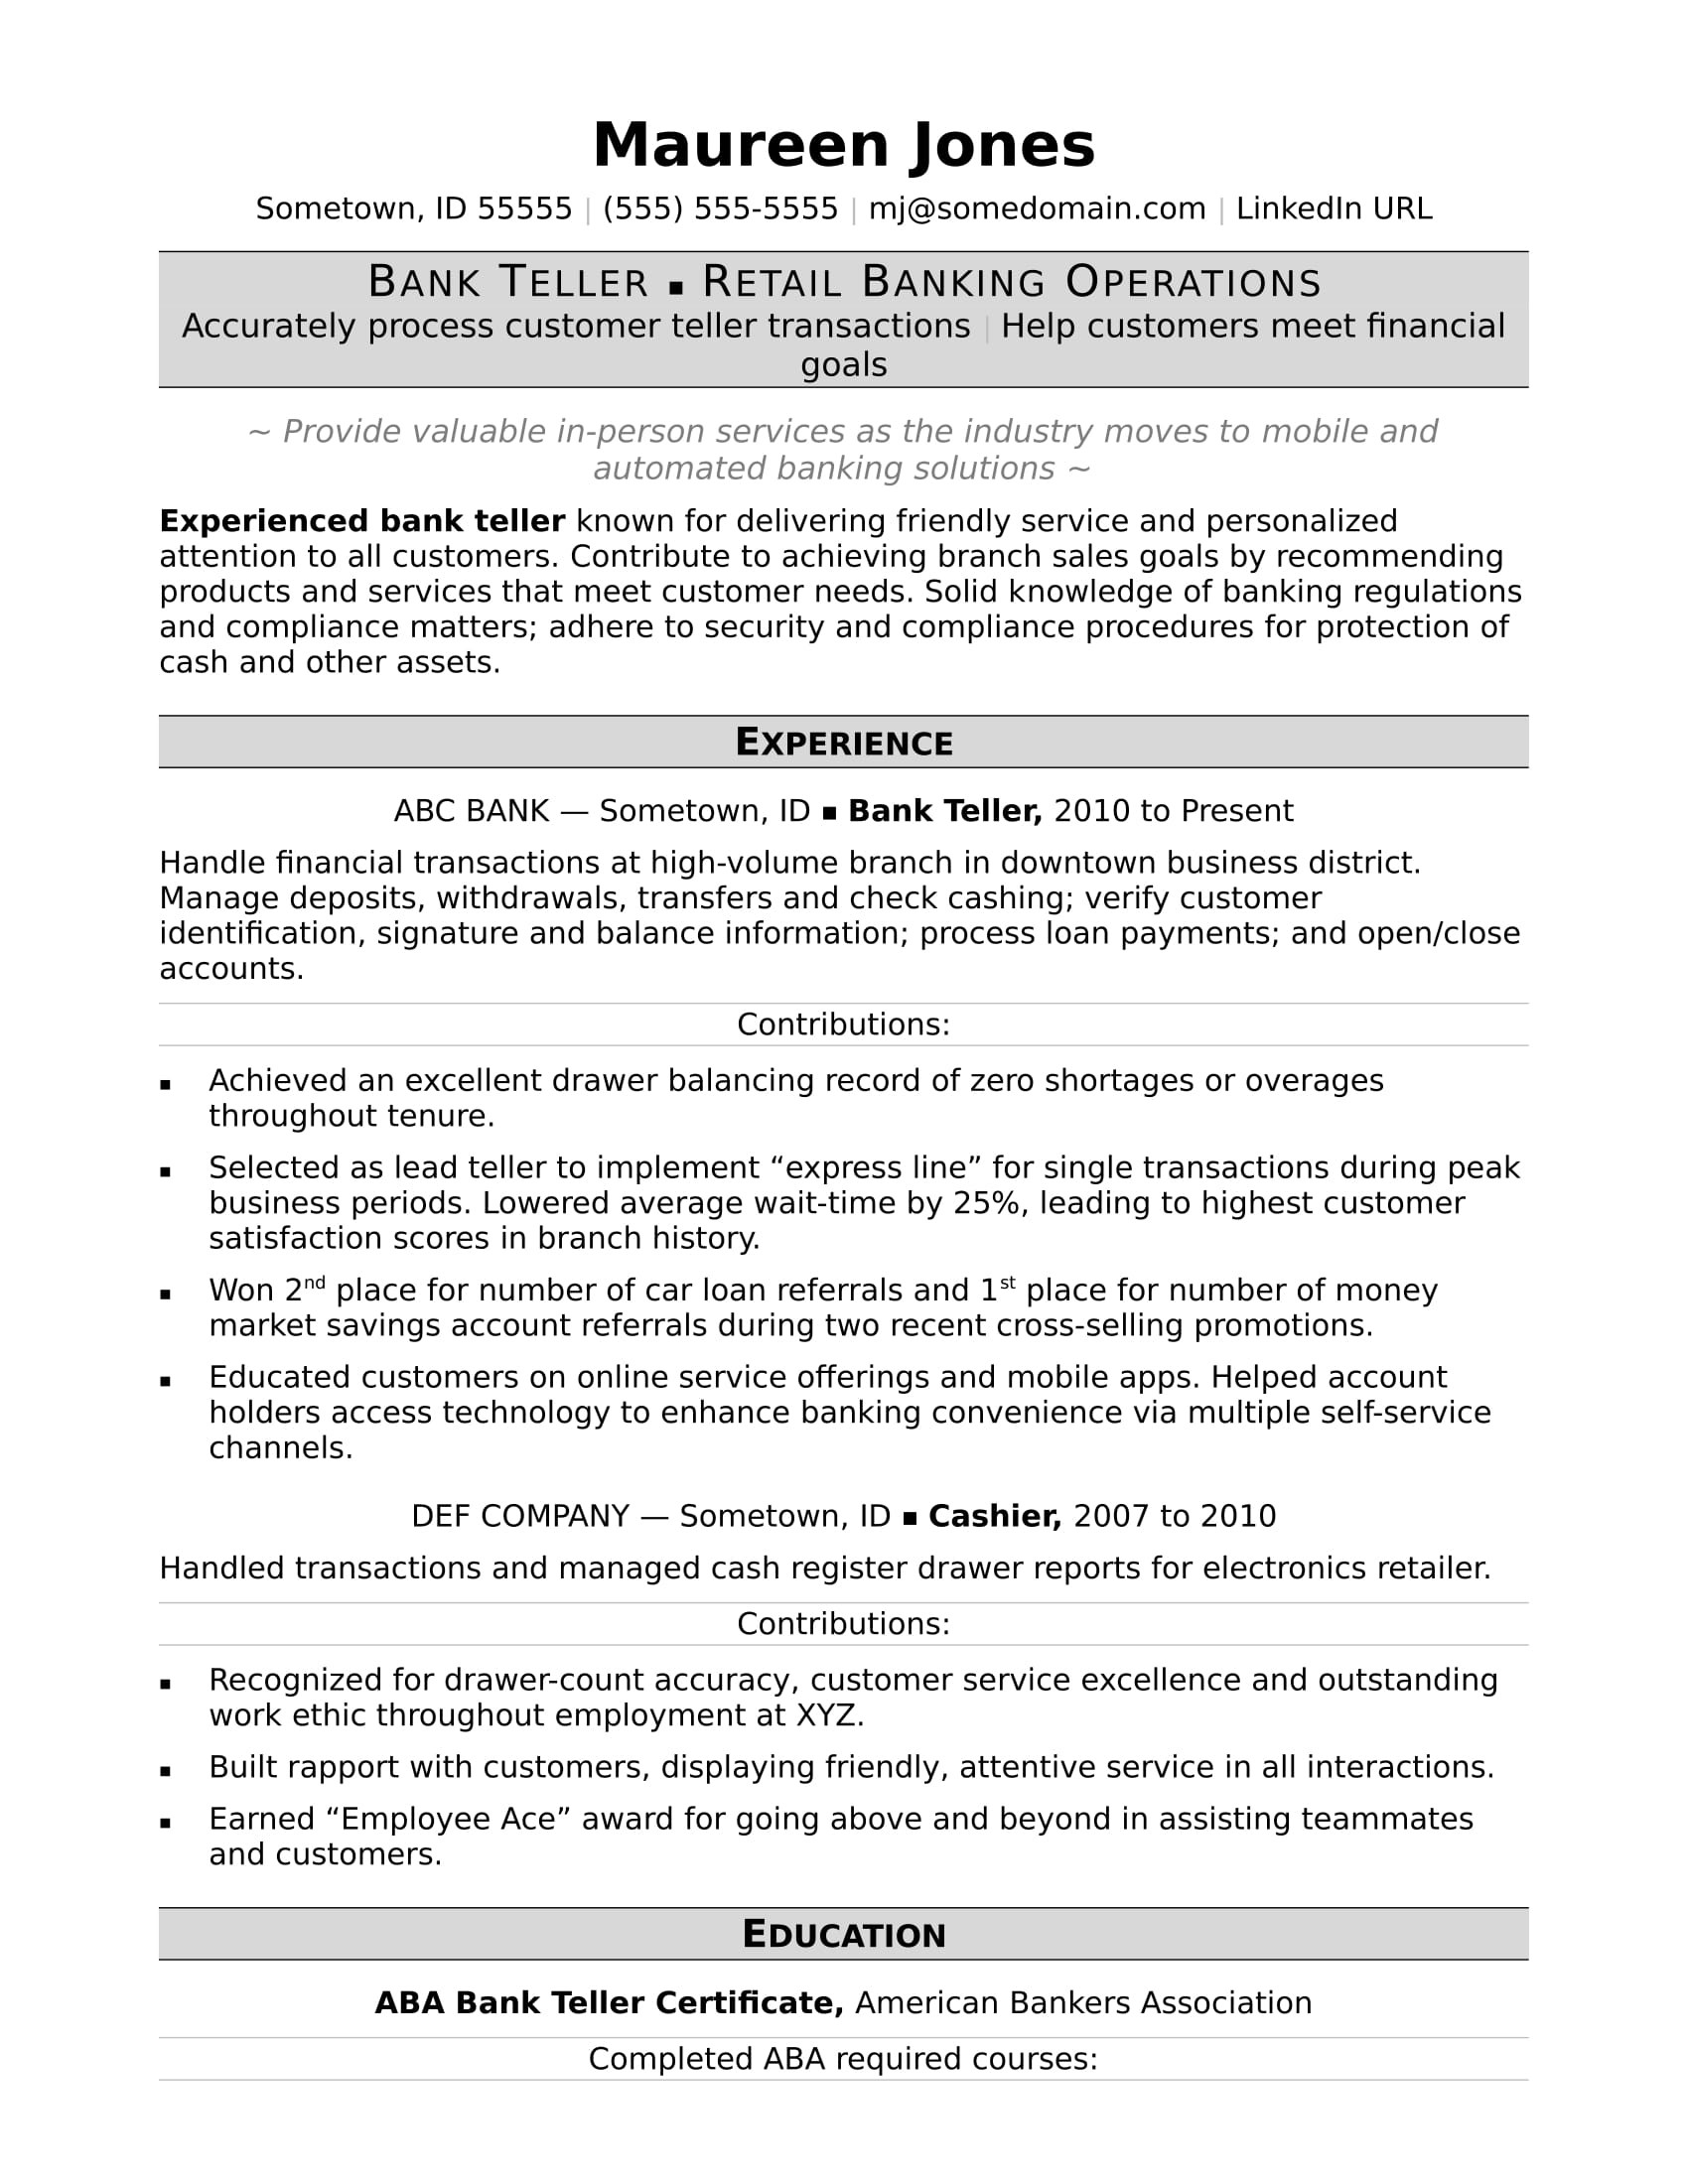 Sample Of A Bank Tellers Resume with One Year Experience Bank Teller Resume Monster.com